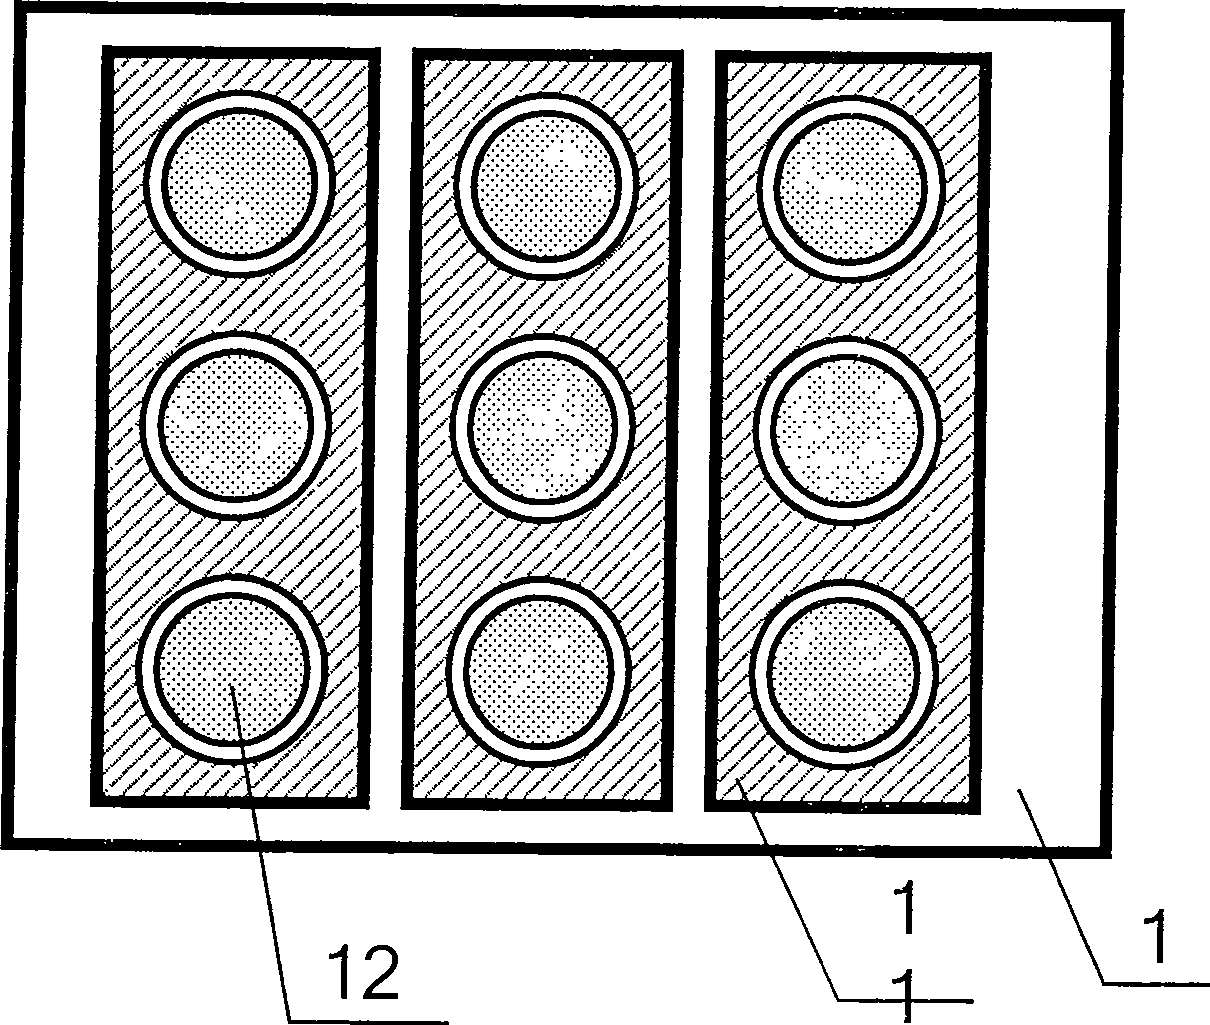 Flat-panel display device with side gate-modulated round-top cathode type emitting structure and its preparing process